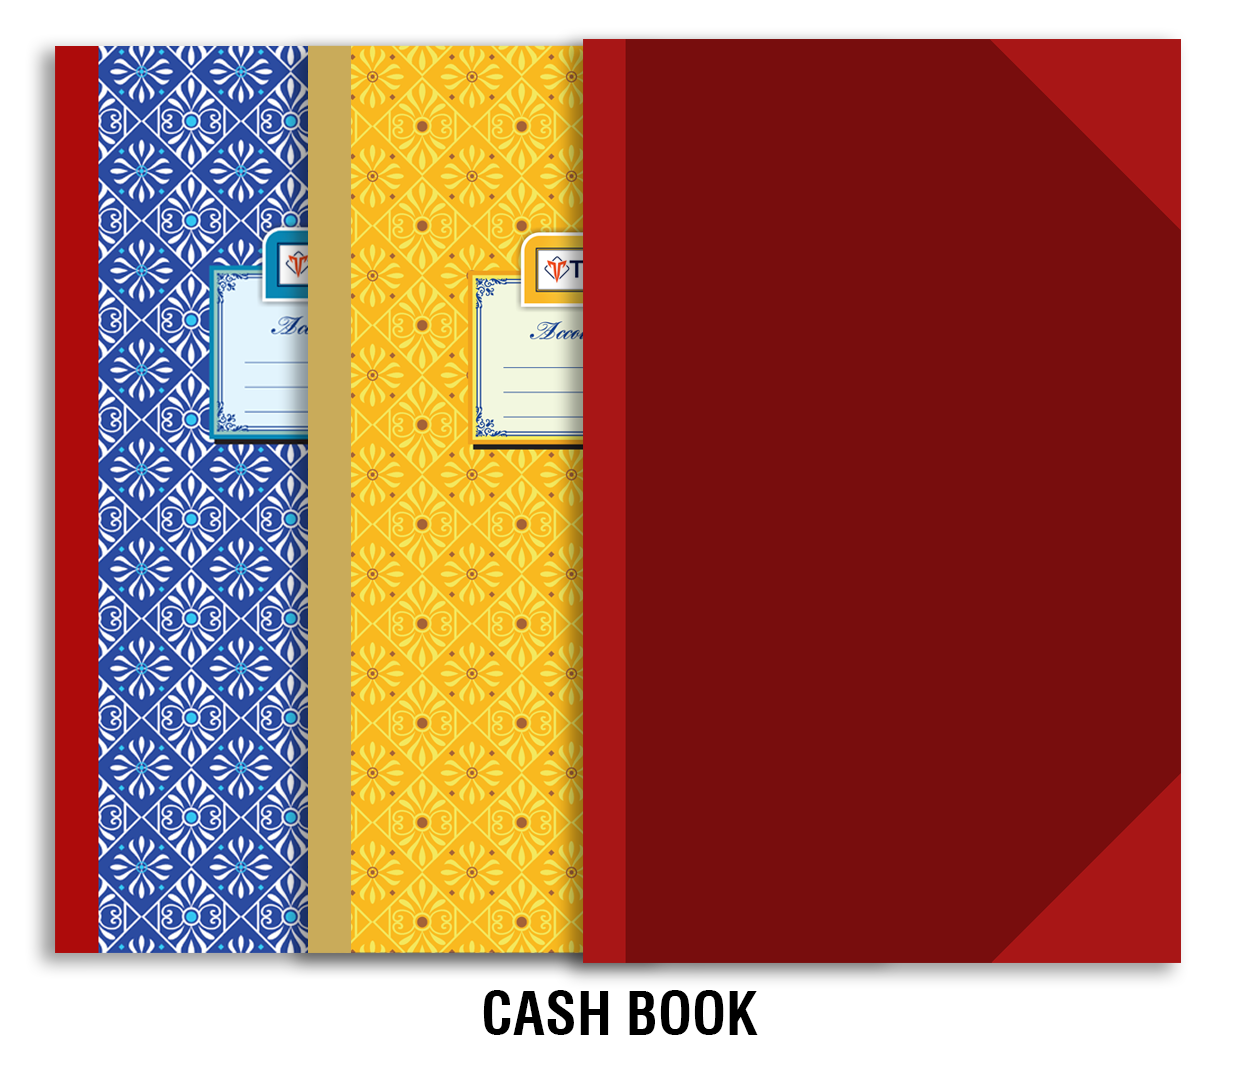 Trison Cash Book (premium quality) | Available in Red Binding (R/B), White Binding (L/B) & Ordinary Binding (O/B) | 70 65 GSM | Green ledger paper | Size: 21.5x34 cm & 19.5 x 32.5 cm | Superior cloth hardbound | Gloss laminated printed cover | PVC rexine cover | Available in No./Pages: 1/64,  2/128, 3/192, 4/256, 5/360, 6/432, 8/576, 10/720 & 12/864 | Comes with Index page | Also known as Kona pusta binding| cashbook | cash copy | cash book | ca | rokkar | rokad | rokda